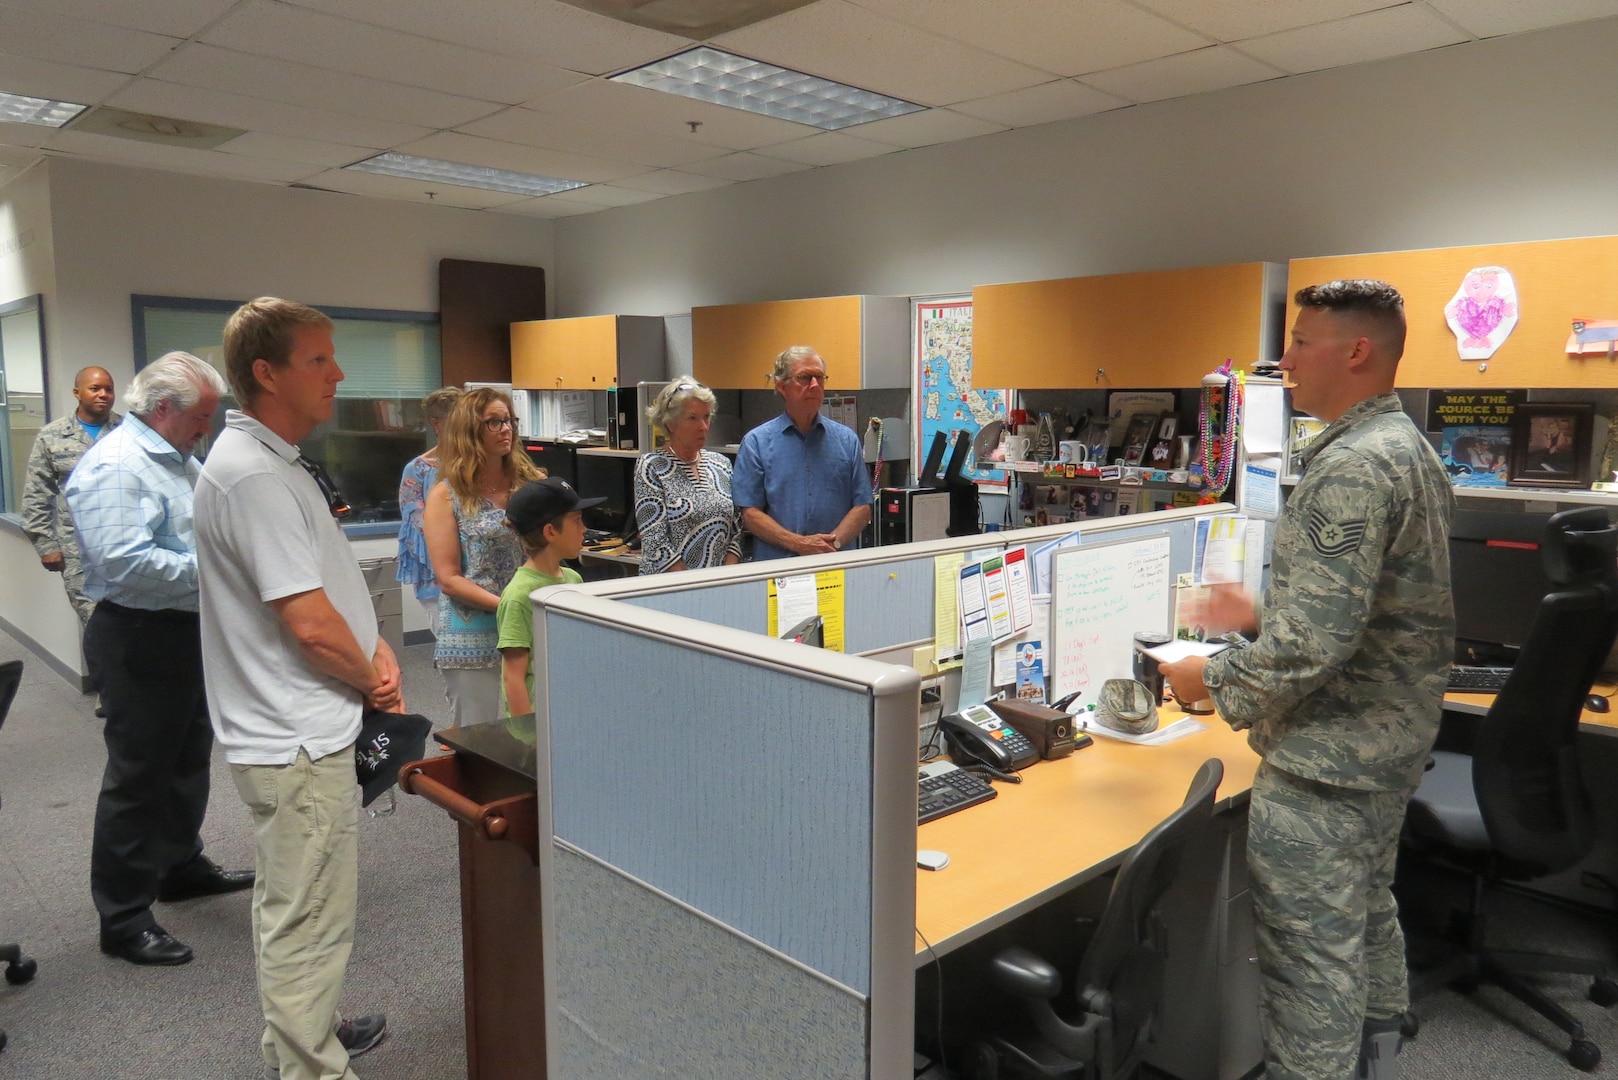 Technical Sgt. Blake Butzer shows a group of family members through the 91st Cyberspace Operations Squadron spaces during an Open House Aug. 25 at Joint Base San Antonio-Lackland, Texas, in support of the 91st COS Centennial. During this event family and friends were treated to snacks, a mission briefing, and a tour of the unit. (Courtesy photo)